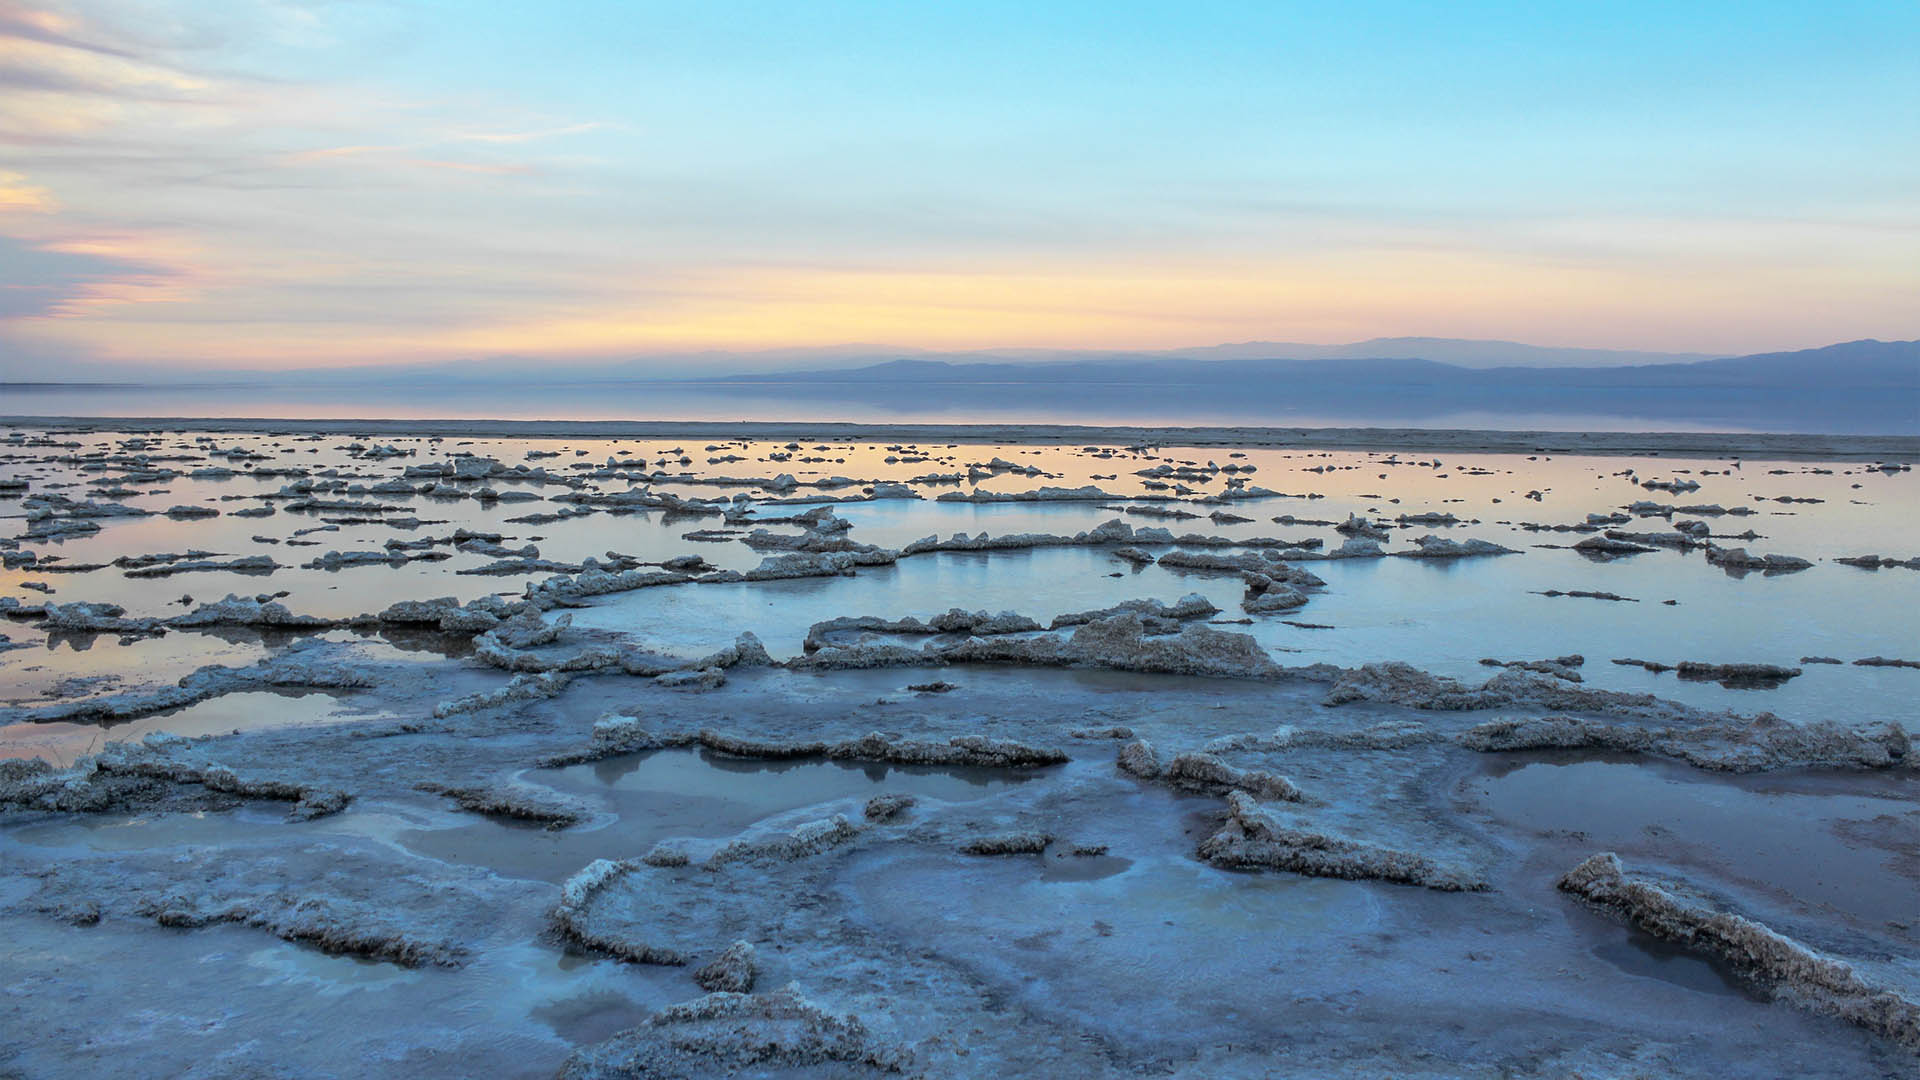 The Salton Sea holds extensive lithium reserves